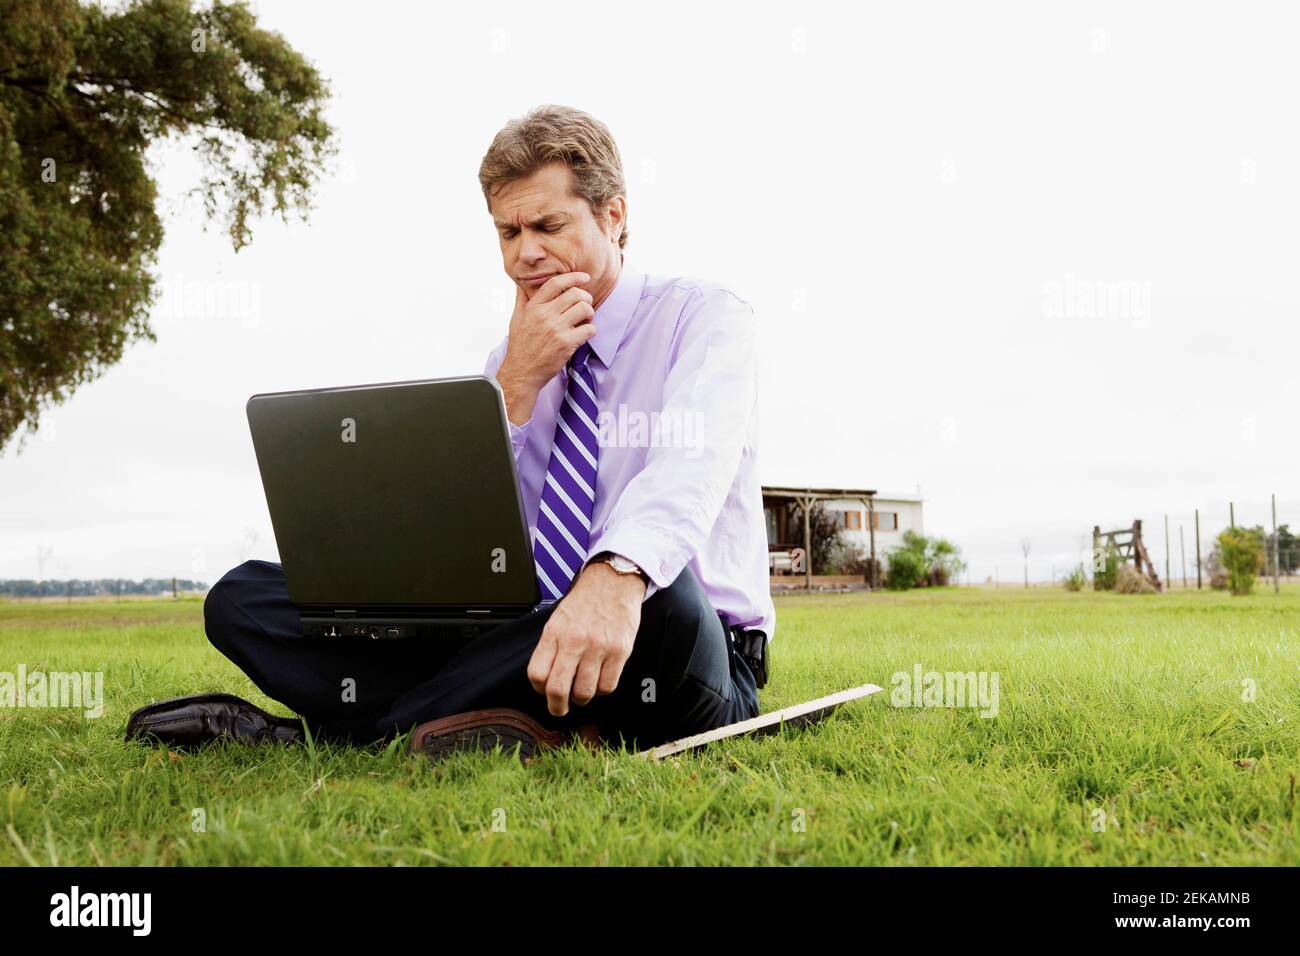 Businessman using a laptop in a field Stock Photo